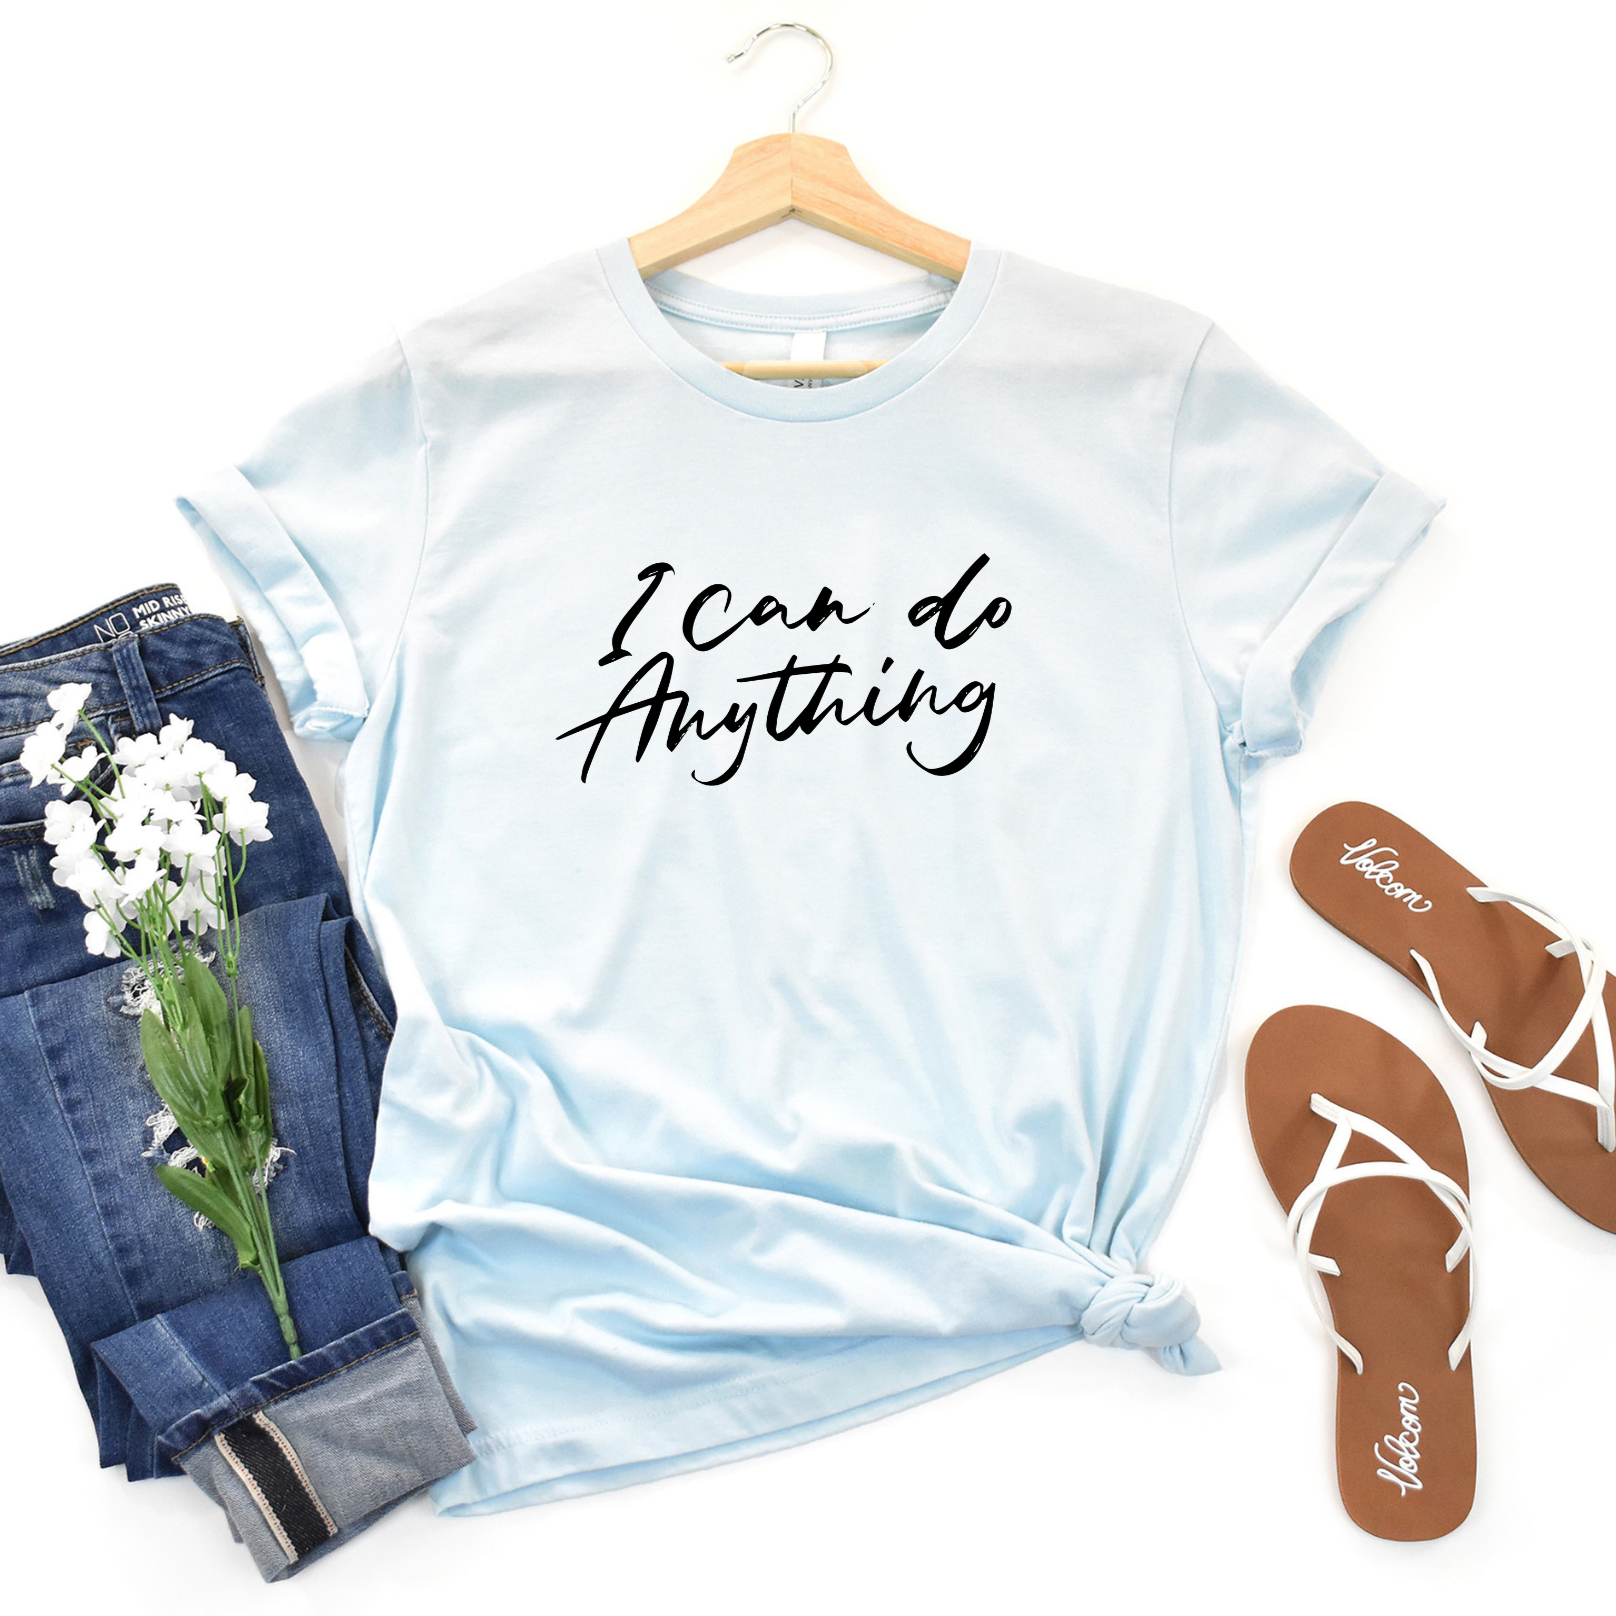 Story of Awakening Lifestyle Community Spirituality Relationships Love Light Meditation Oneness Earth Balance Healing Shop Store Charity Tree Nature Read Write T shirt Tops Tees Clothing Women Horoscope Organic I Can Do Anything Quote White Blue